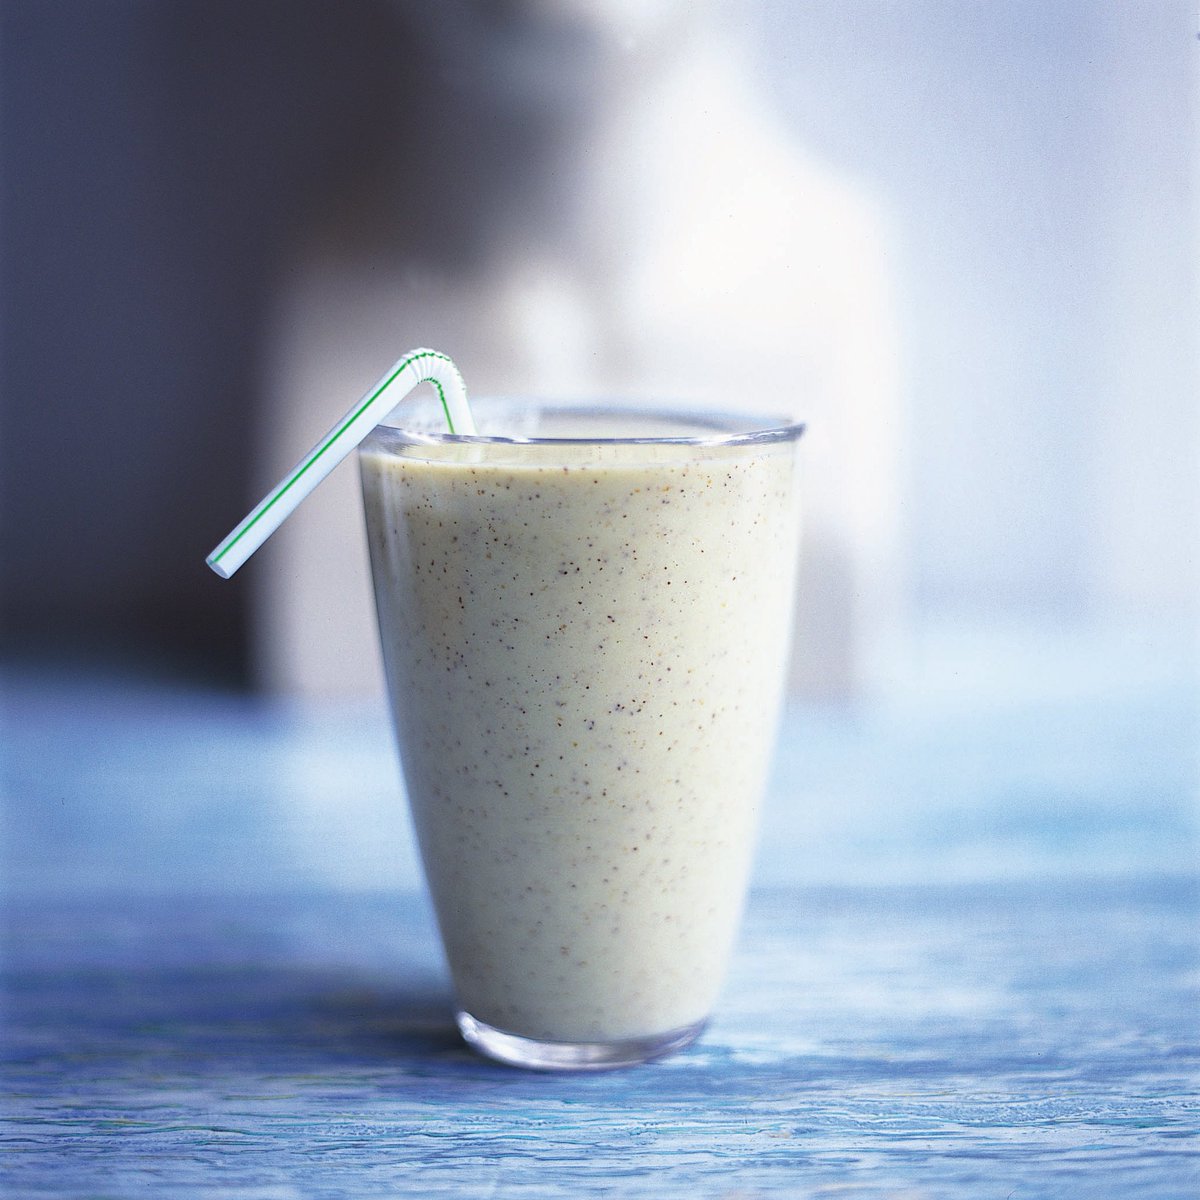 Blitz this kiwi, ginger & banana breakfast smoothie together in minutes & drink on the go! https://t.co/SOaKvRY6MU https://t.co/Js1iDcEZaz